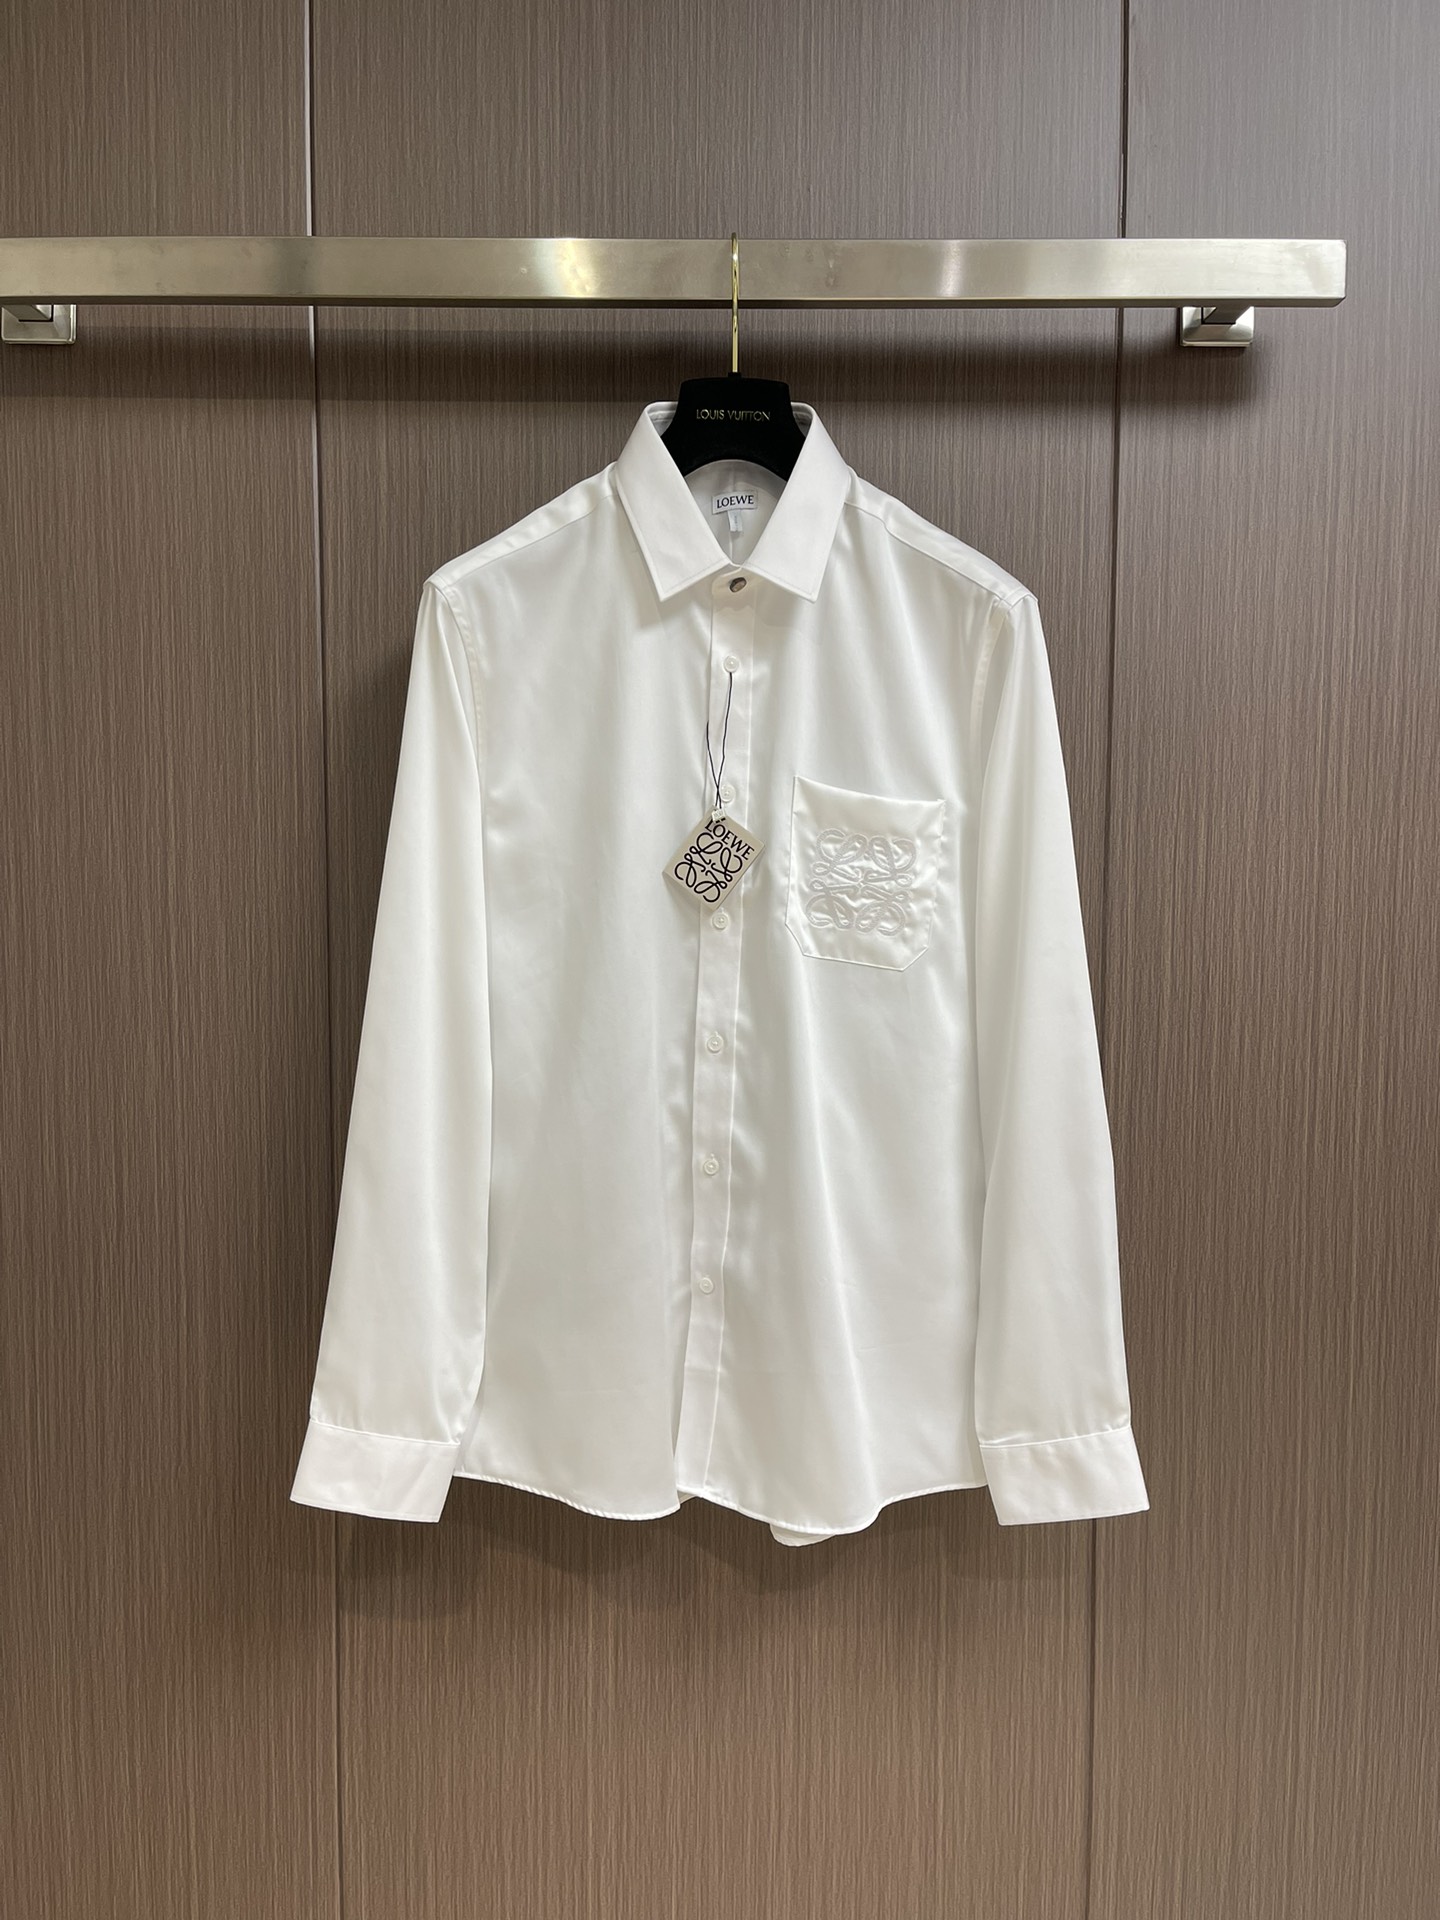 Loewe Clothing Shirts & Blouses Buy best quality Replica
 Embroidery Fall Collection